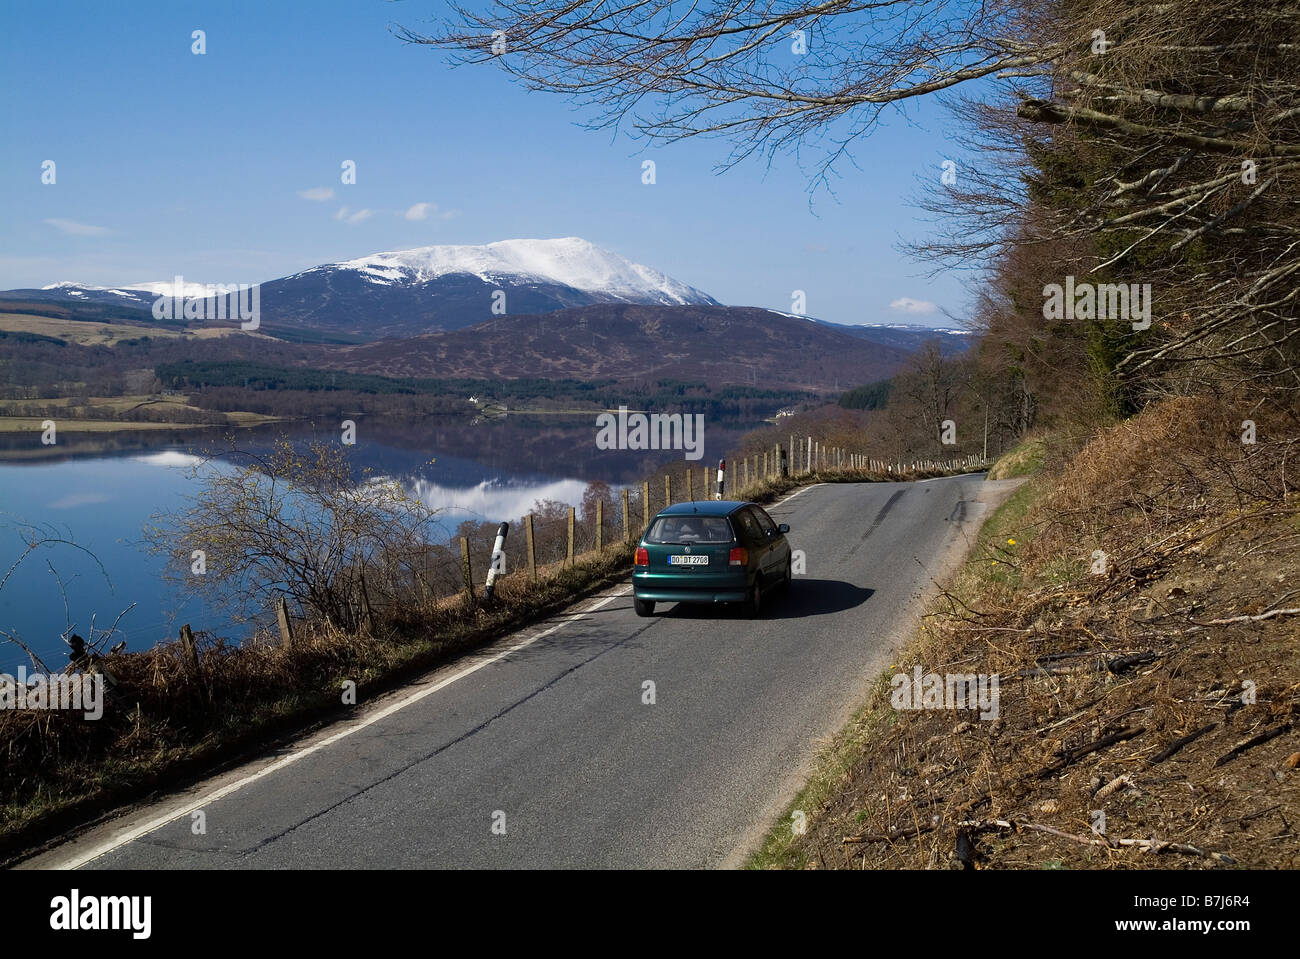 dh Loch Tummel STRATHTUMMEL PERTHSHIRE Tay Forest Park mountain scotland scenic scottish highlands car countryside highland drive country road B8019 Stock Photo